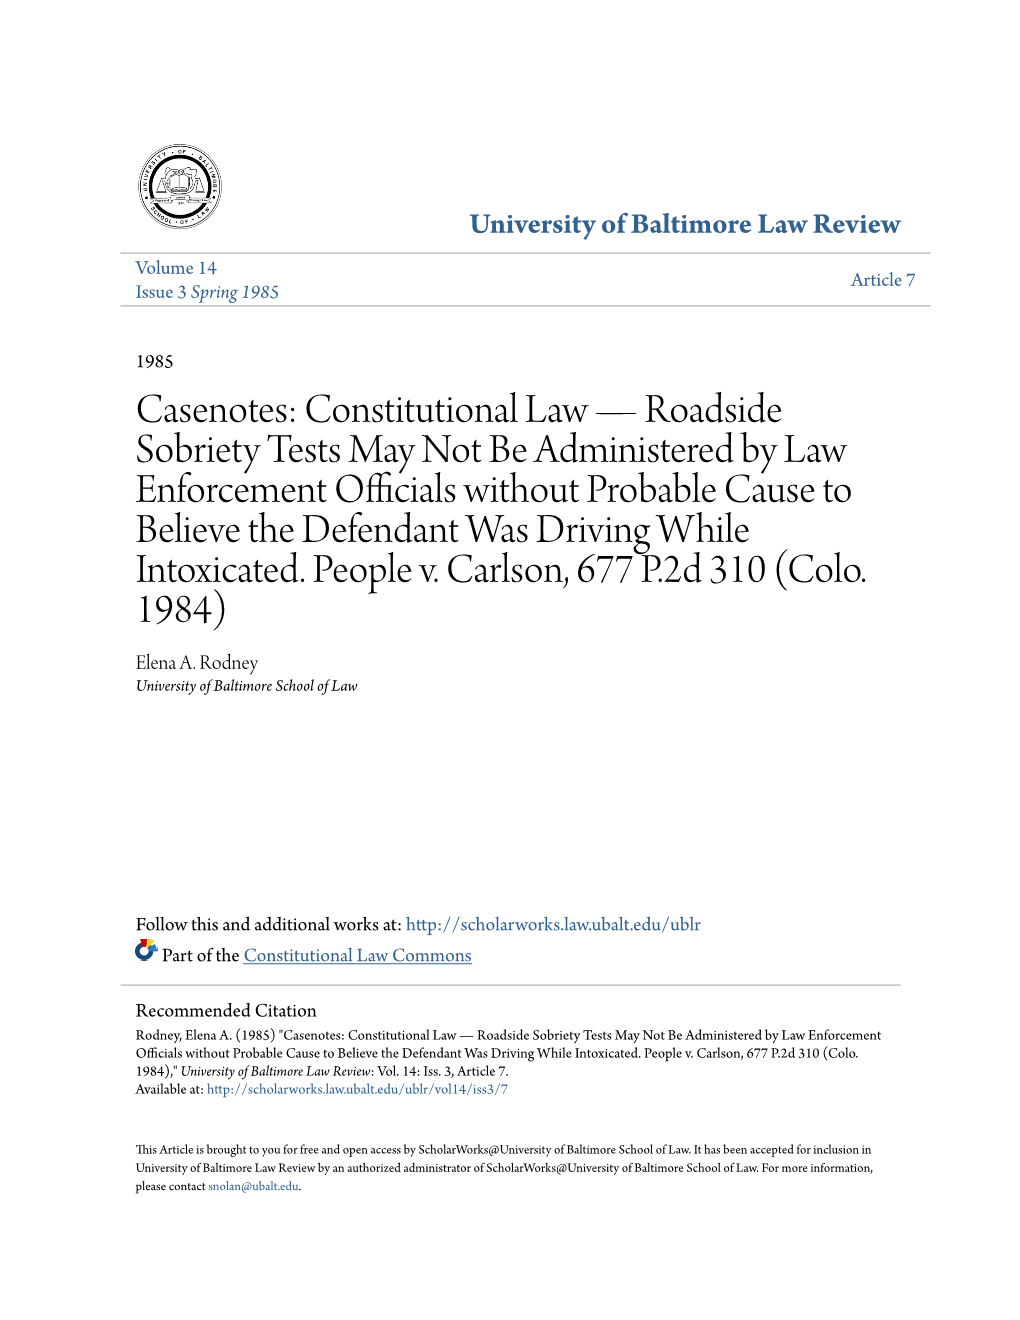 Casenotes: Constitutional Law—Roadside Sobriety Tests May Not